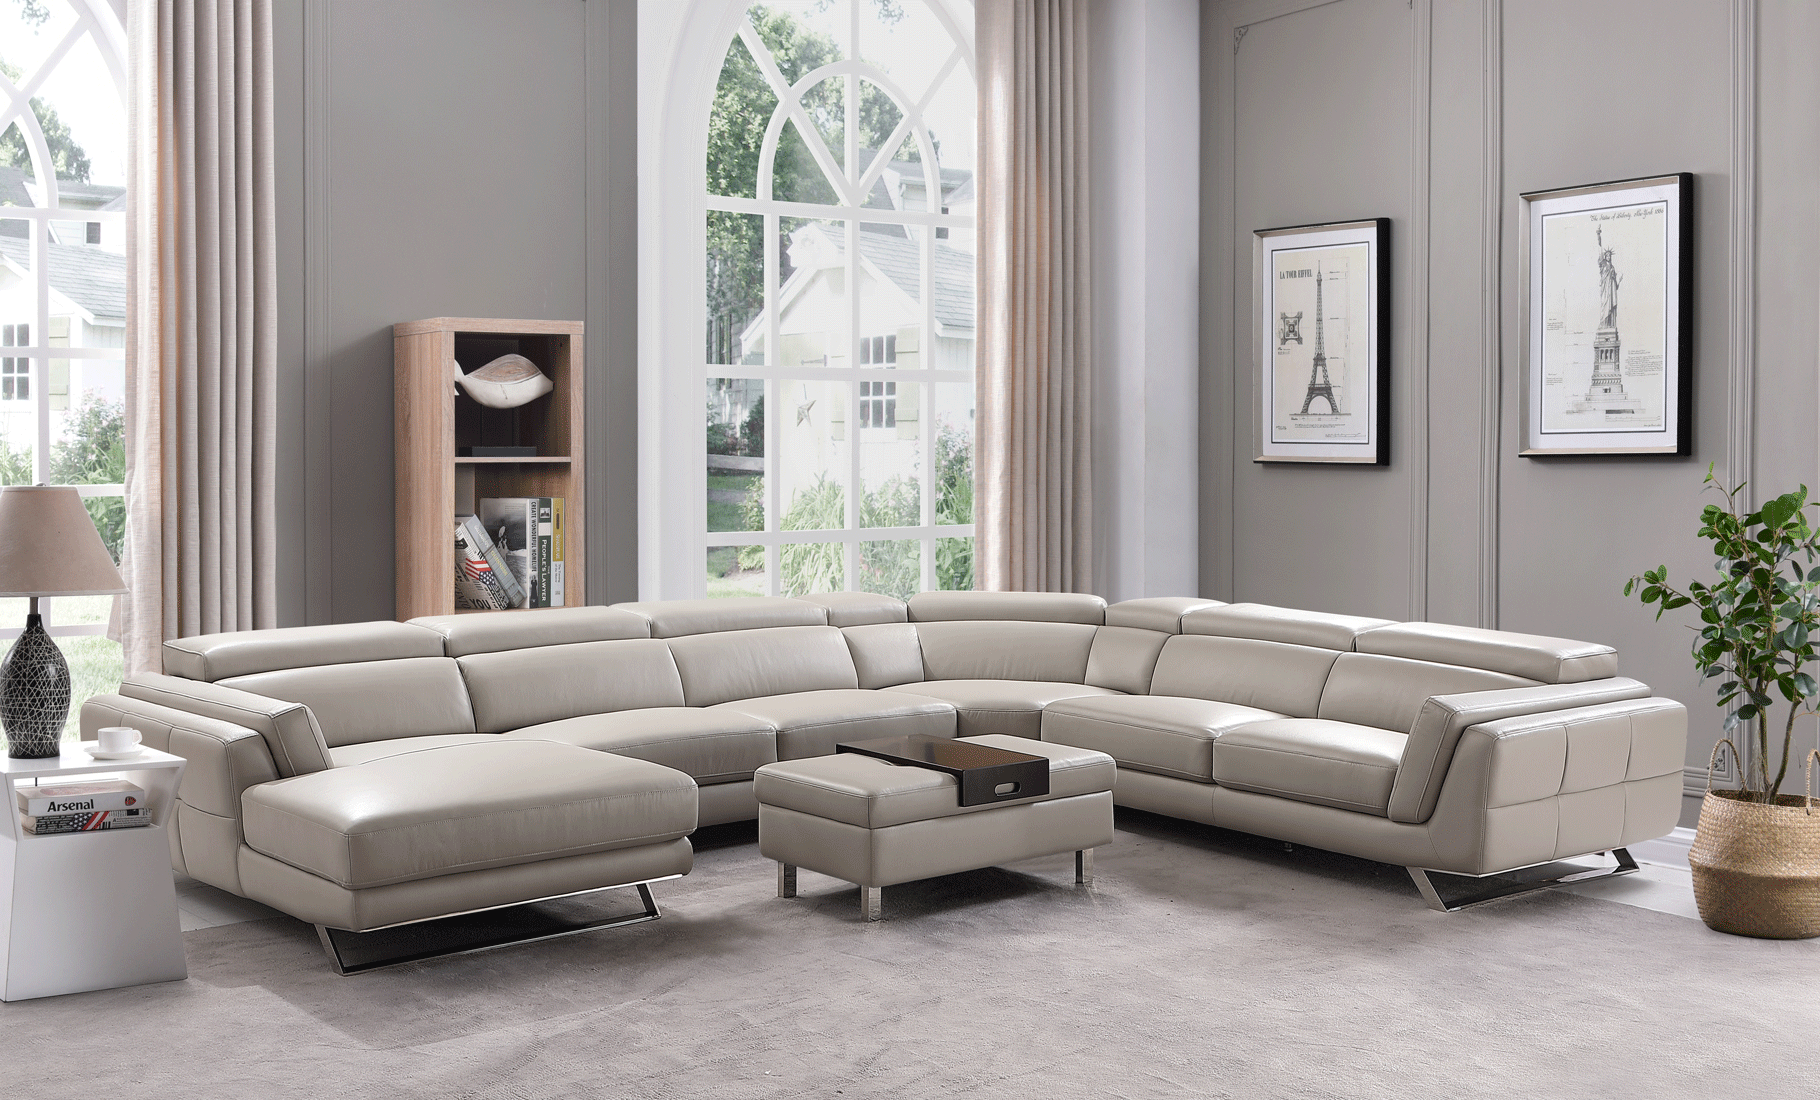 Living Room Furniture Sleepers Sofas Loveseats and Chairs 582 Sectional Left